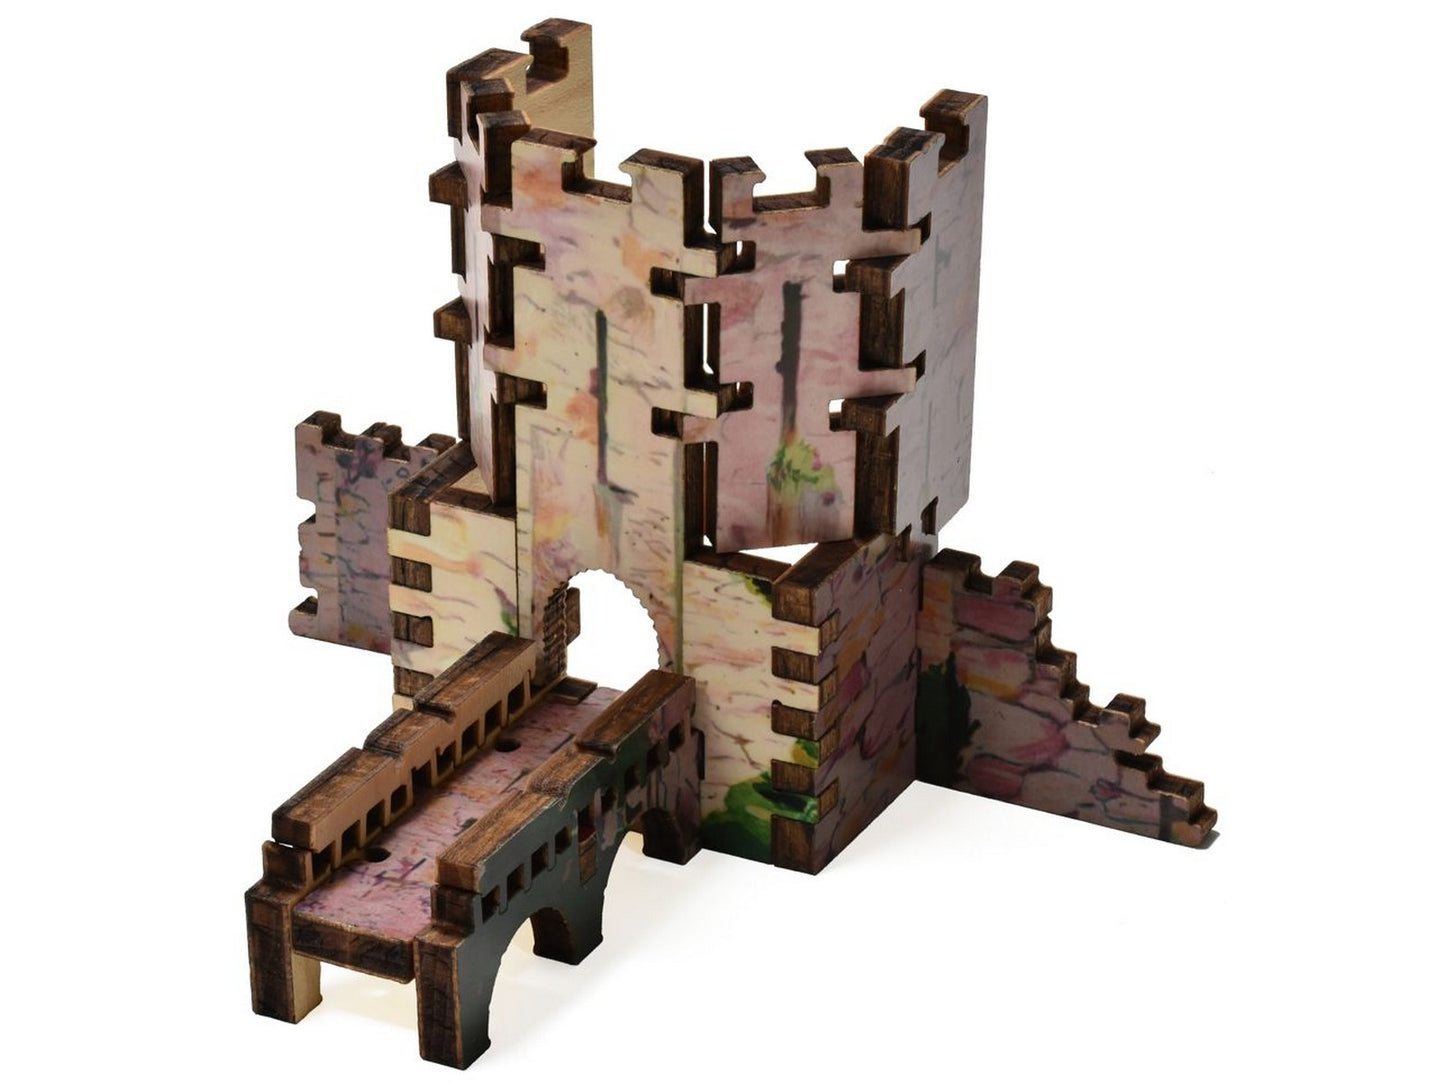 A 3D version of Wisby Castle that can be built from pieces in the puzzle.